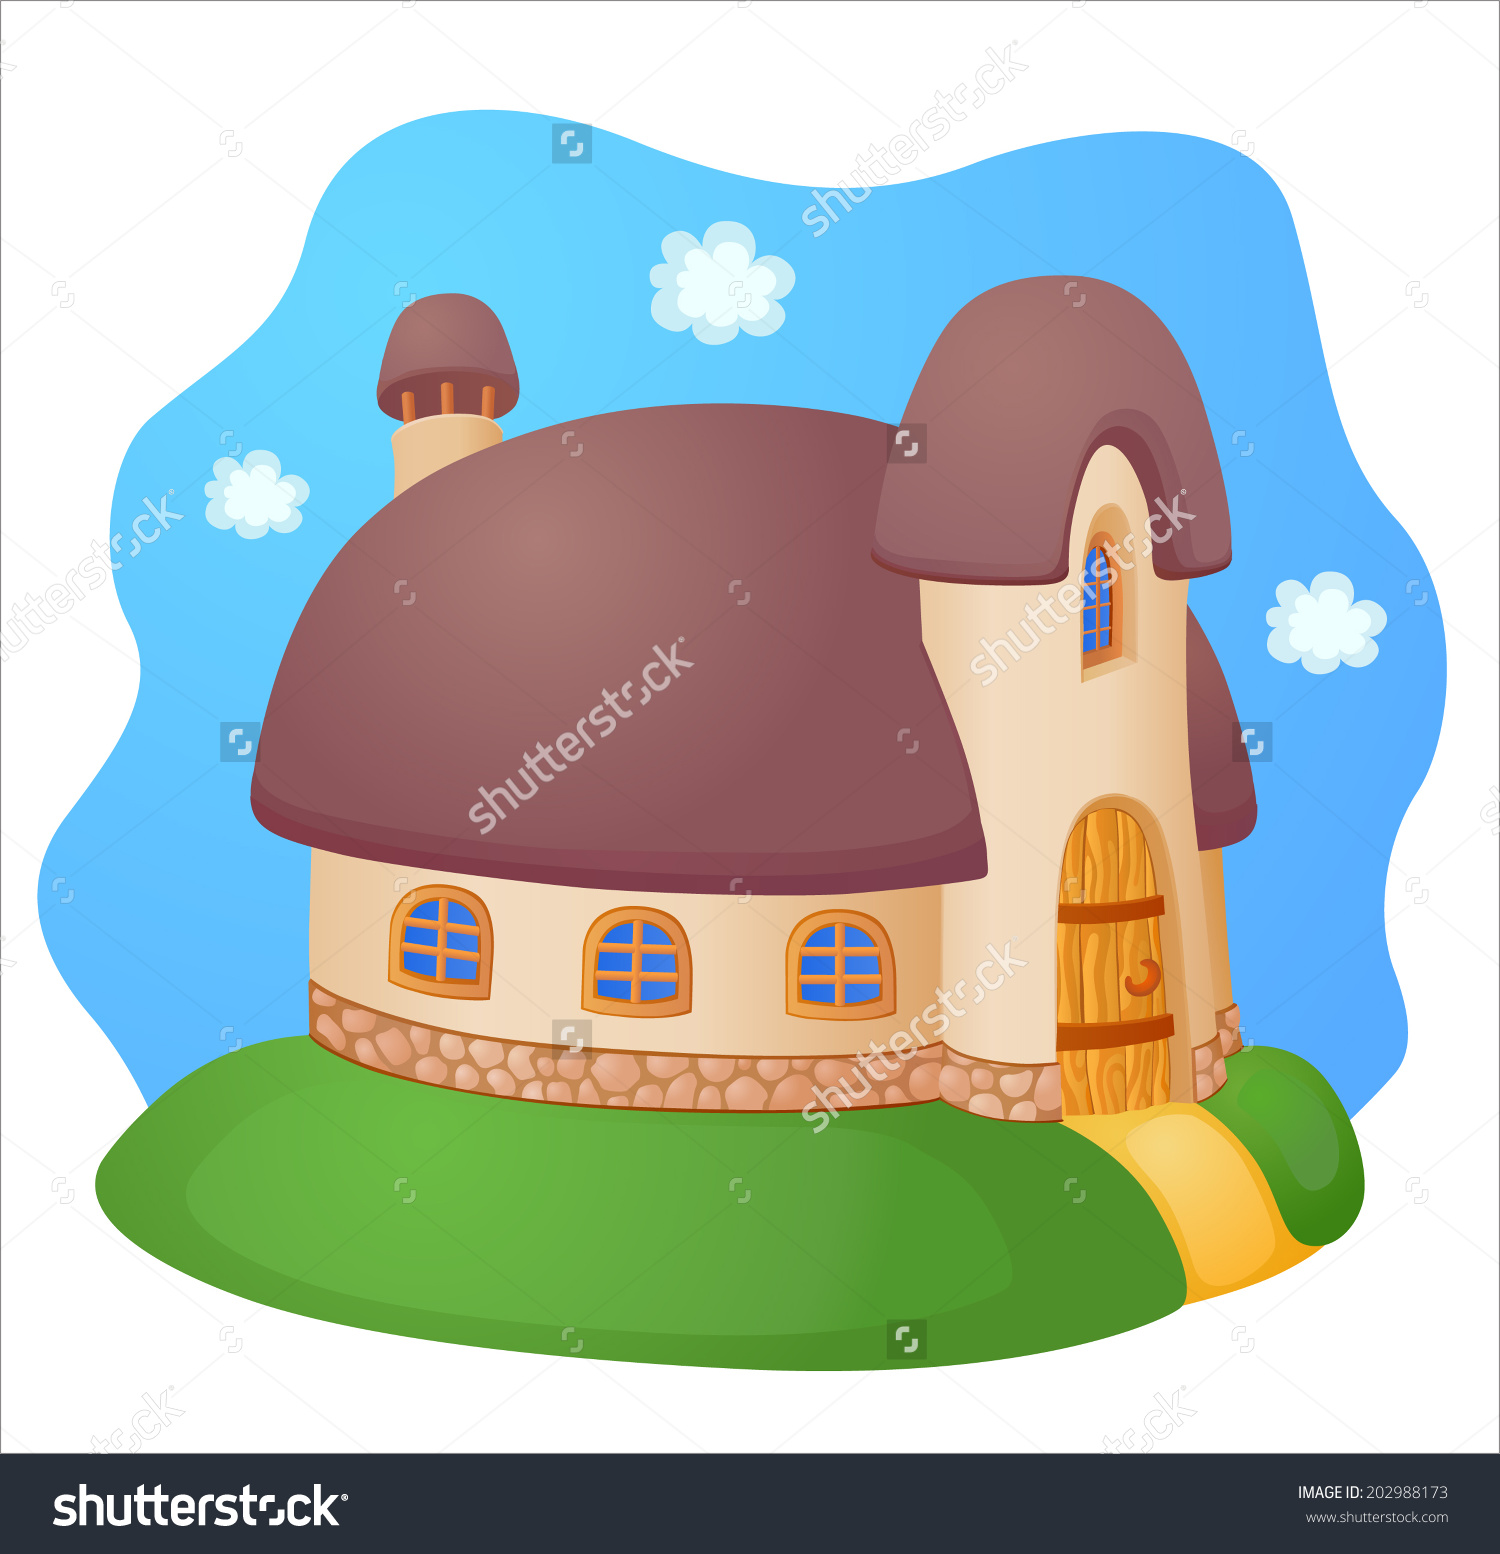 Fairy House With A Reed Roof Stock Vector Illustration 202988173.